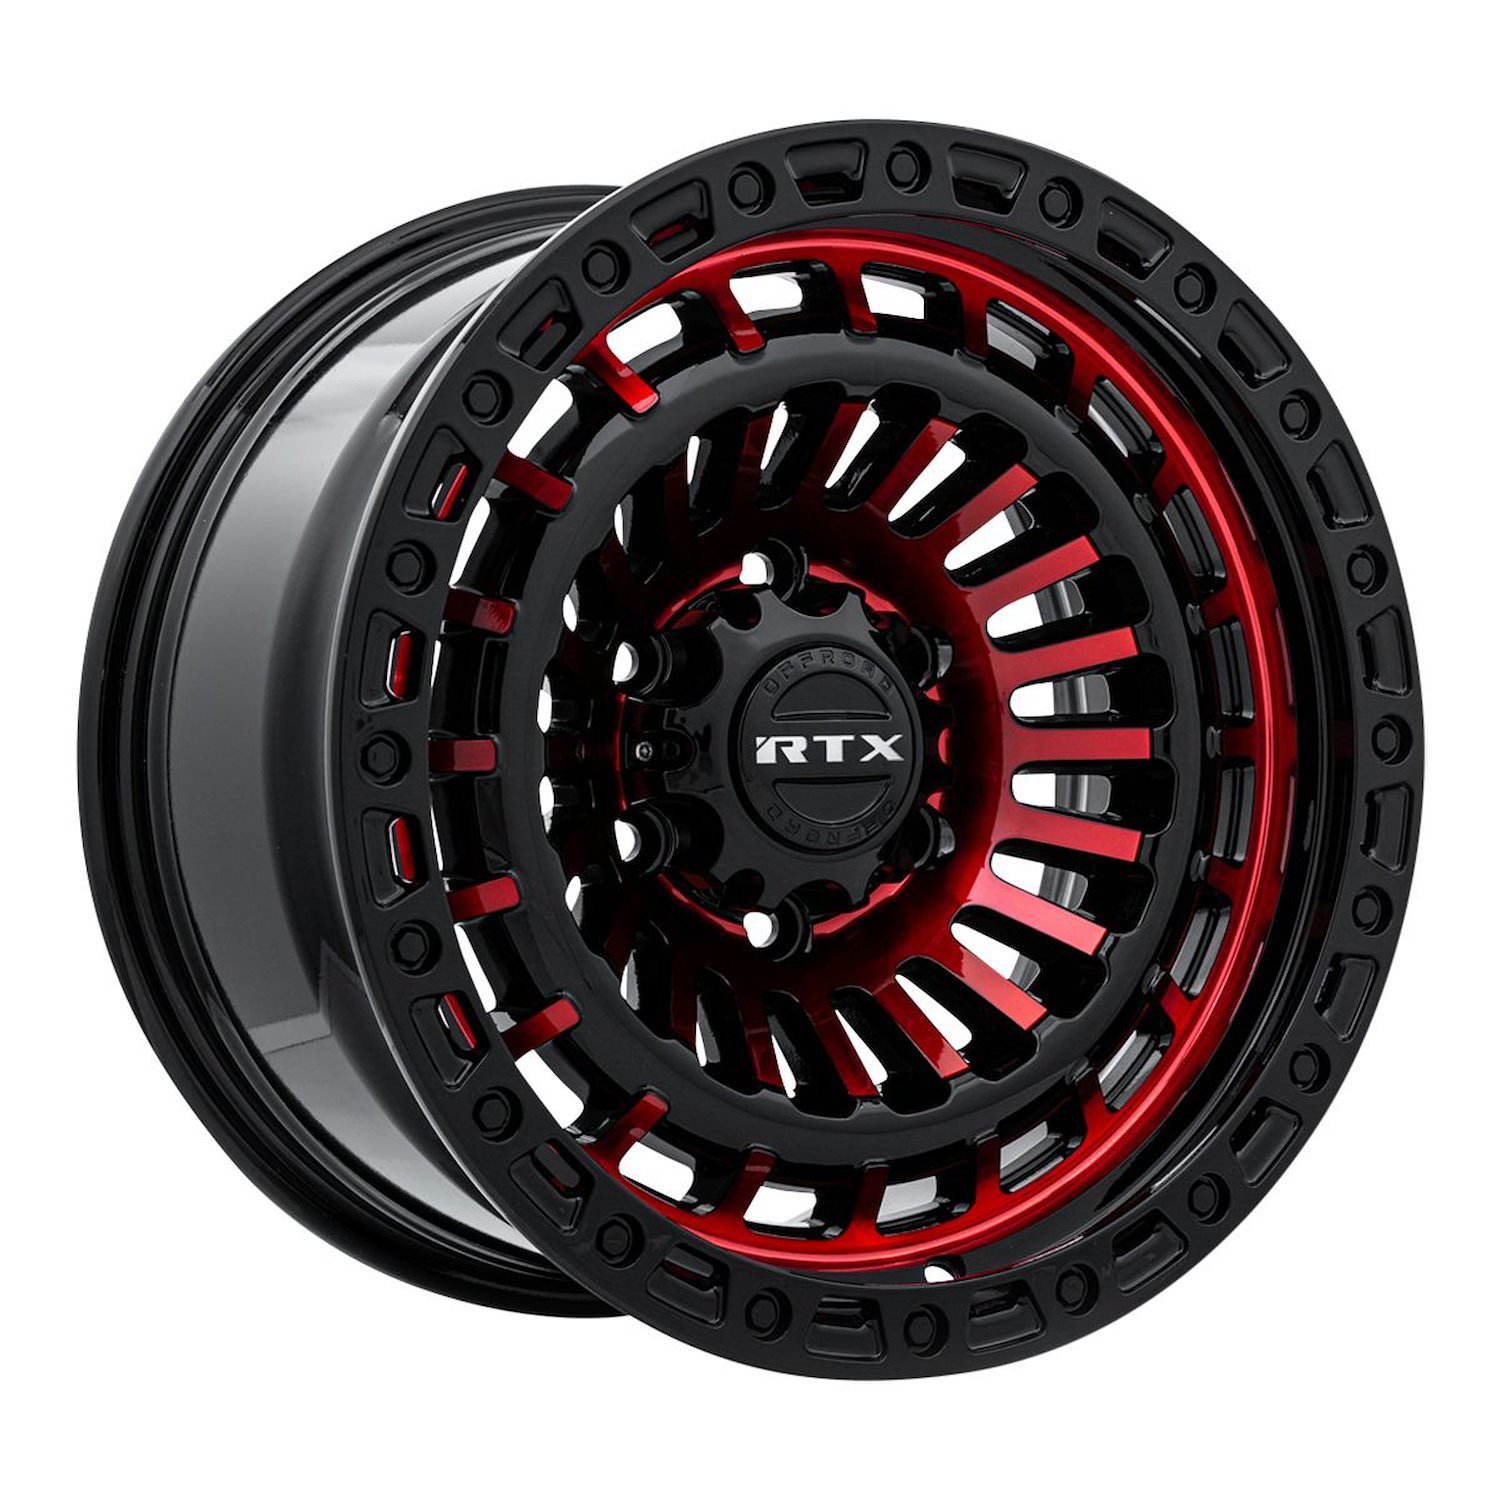 083095 Off-Road Series Moab Wheel [Size: 18" x 9"] Gloss Black Machined Red Lip Finish